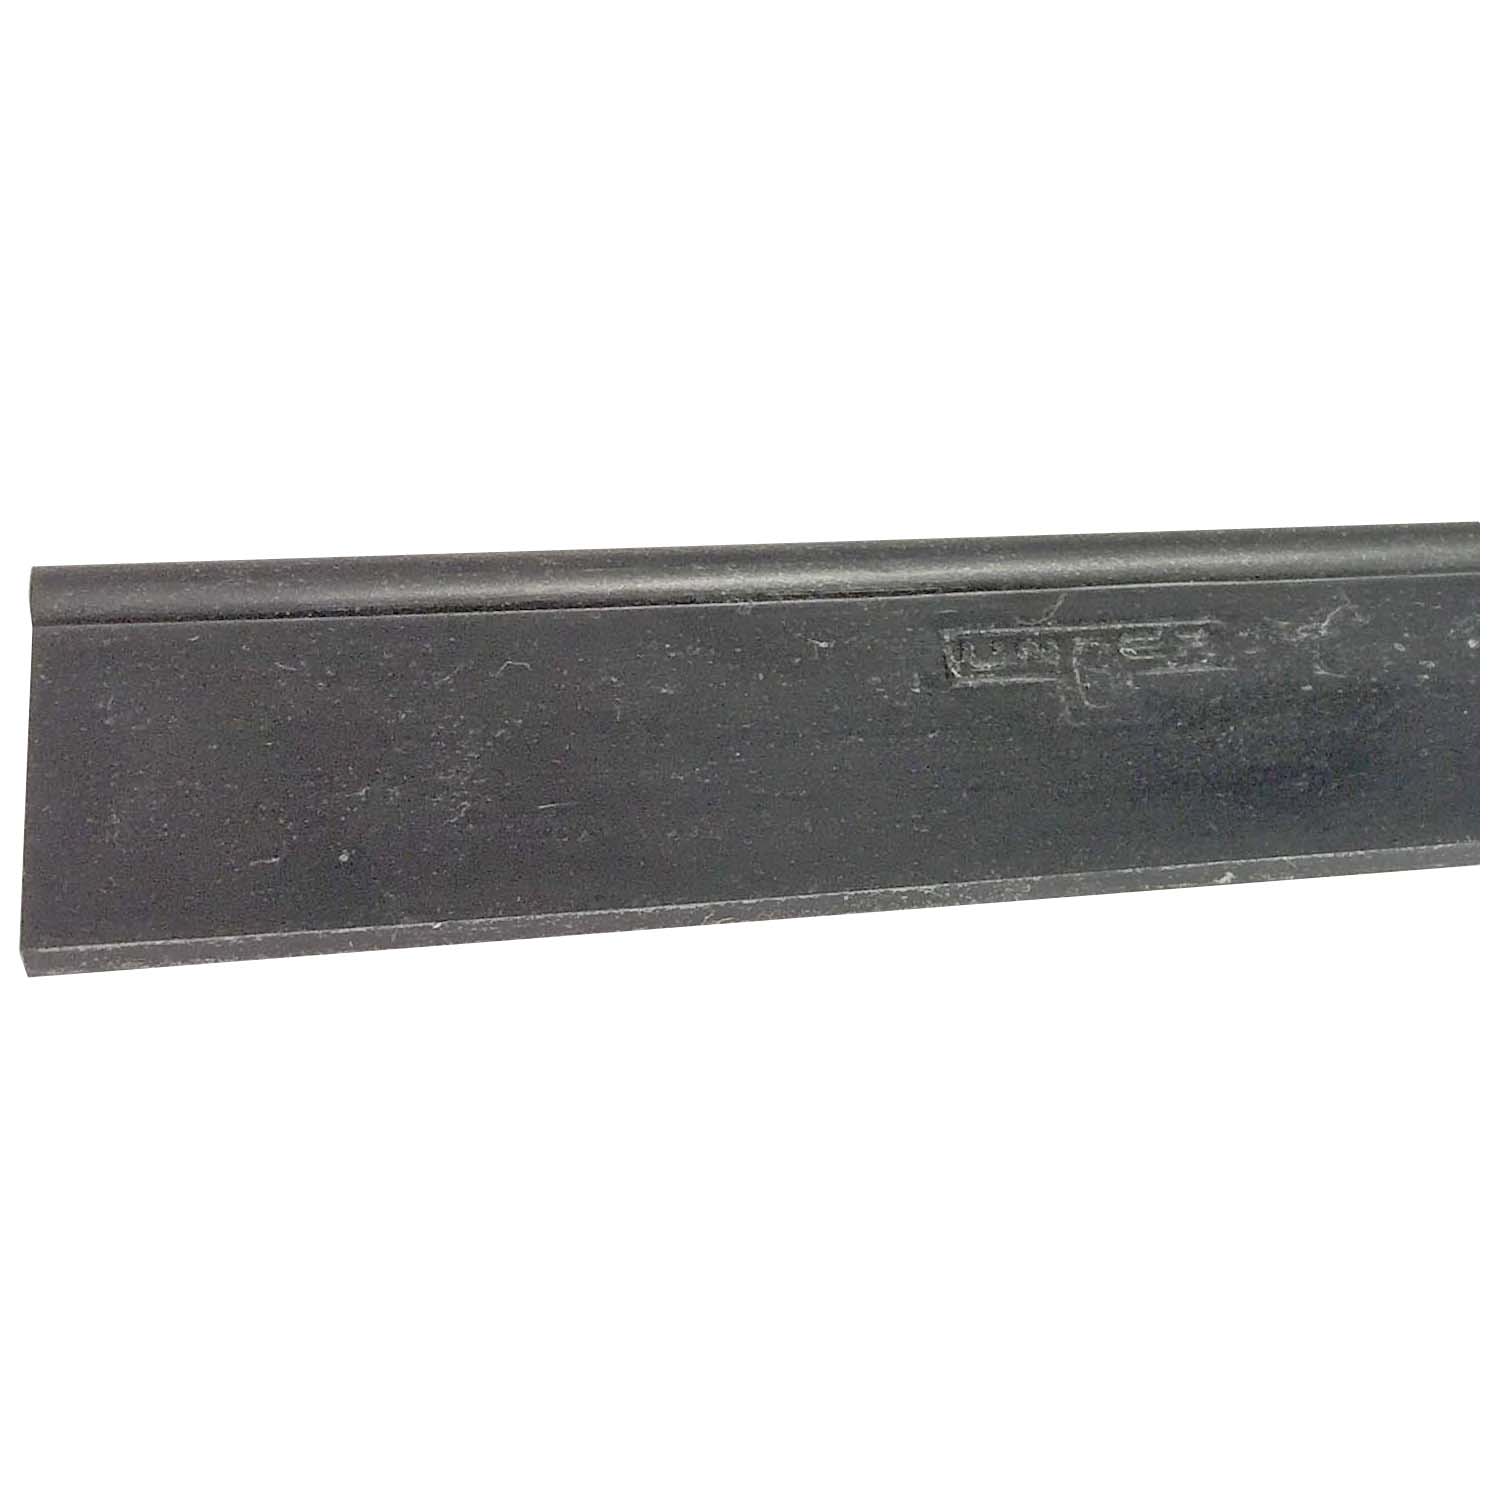 Unger-12-inch-Soft-Rubber